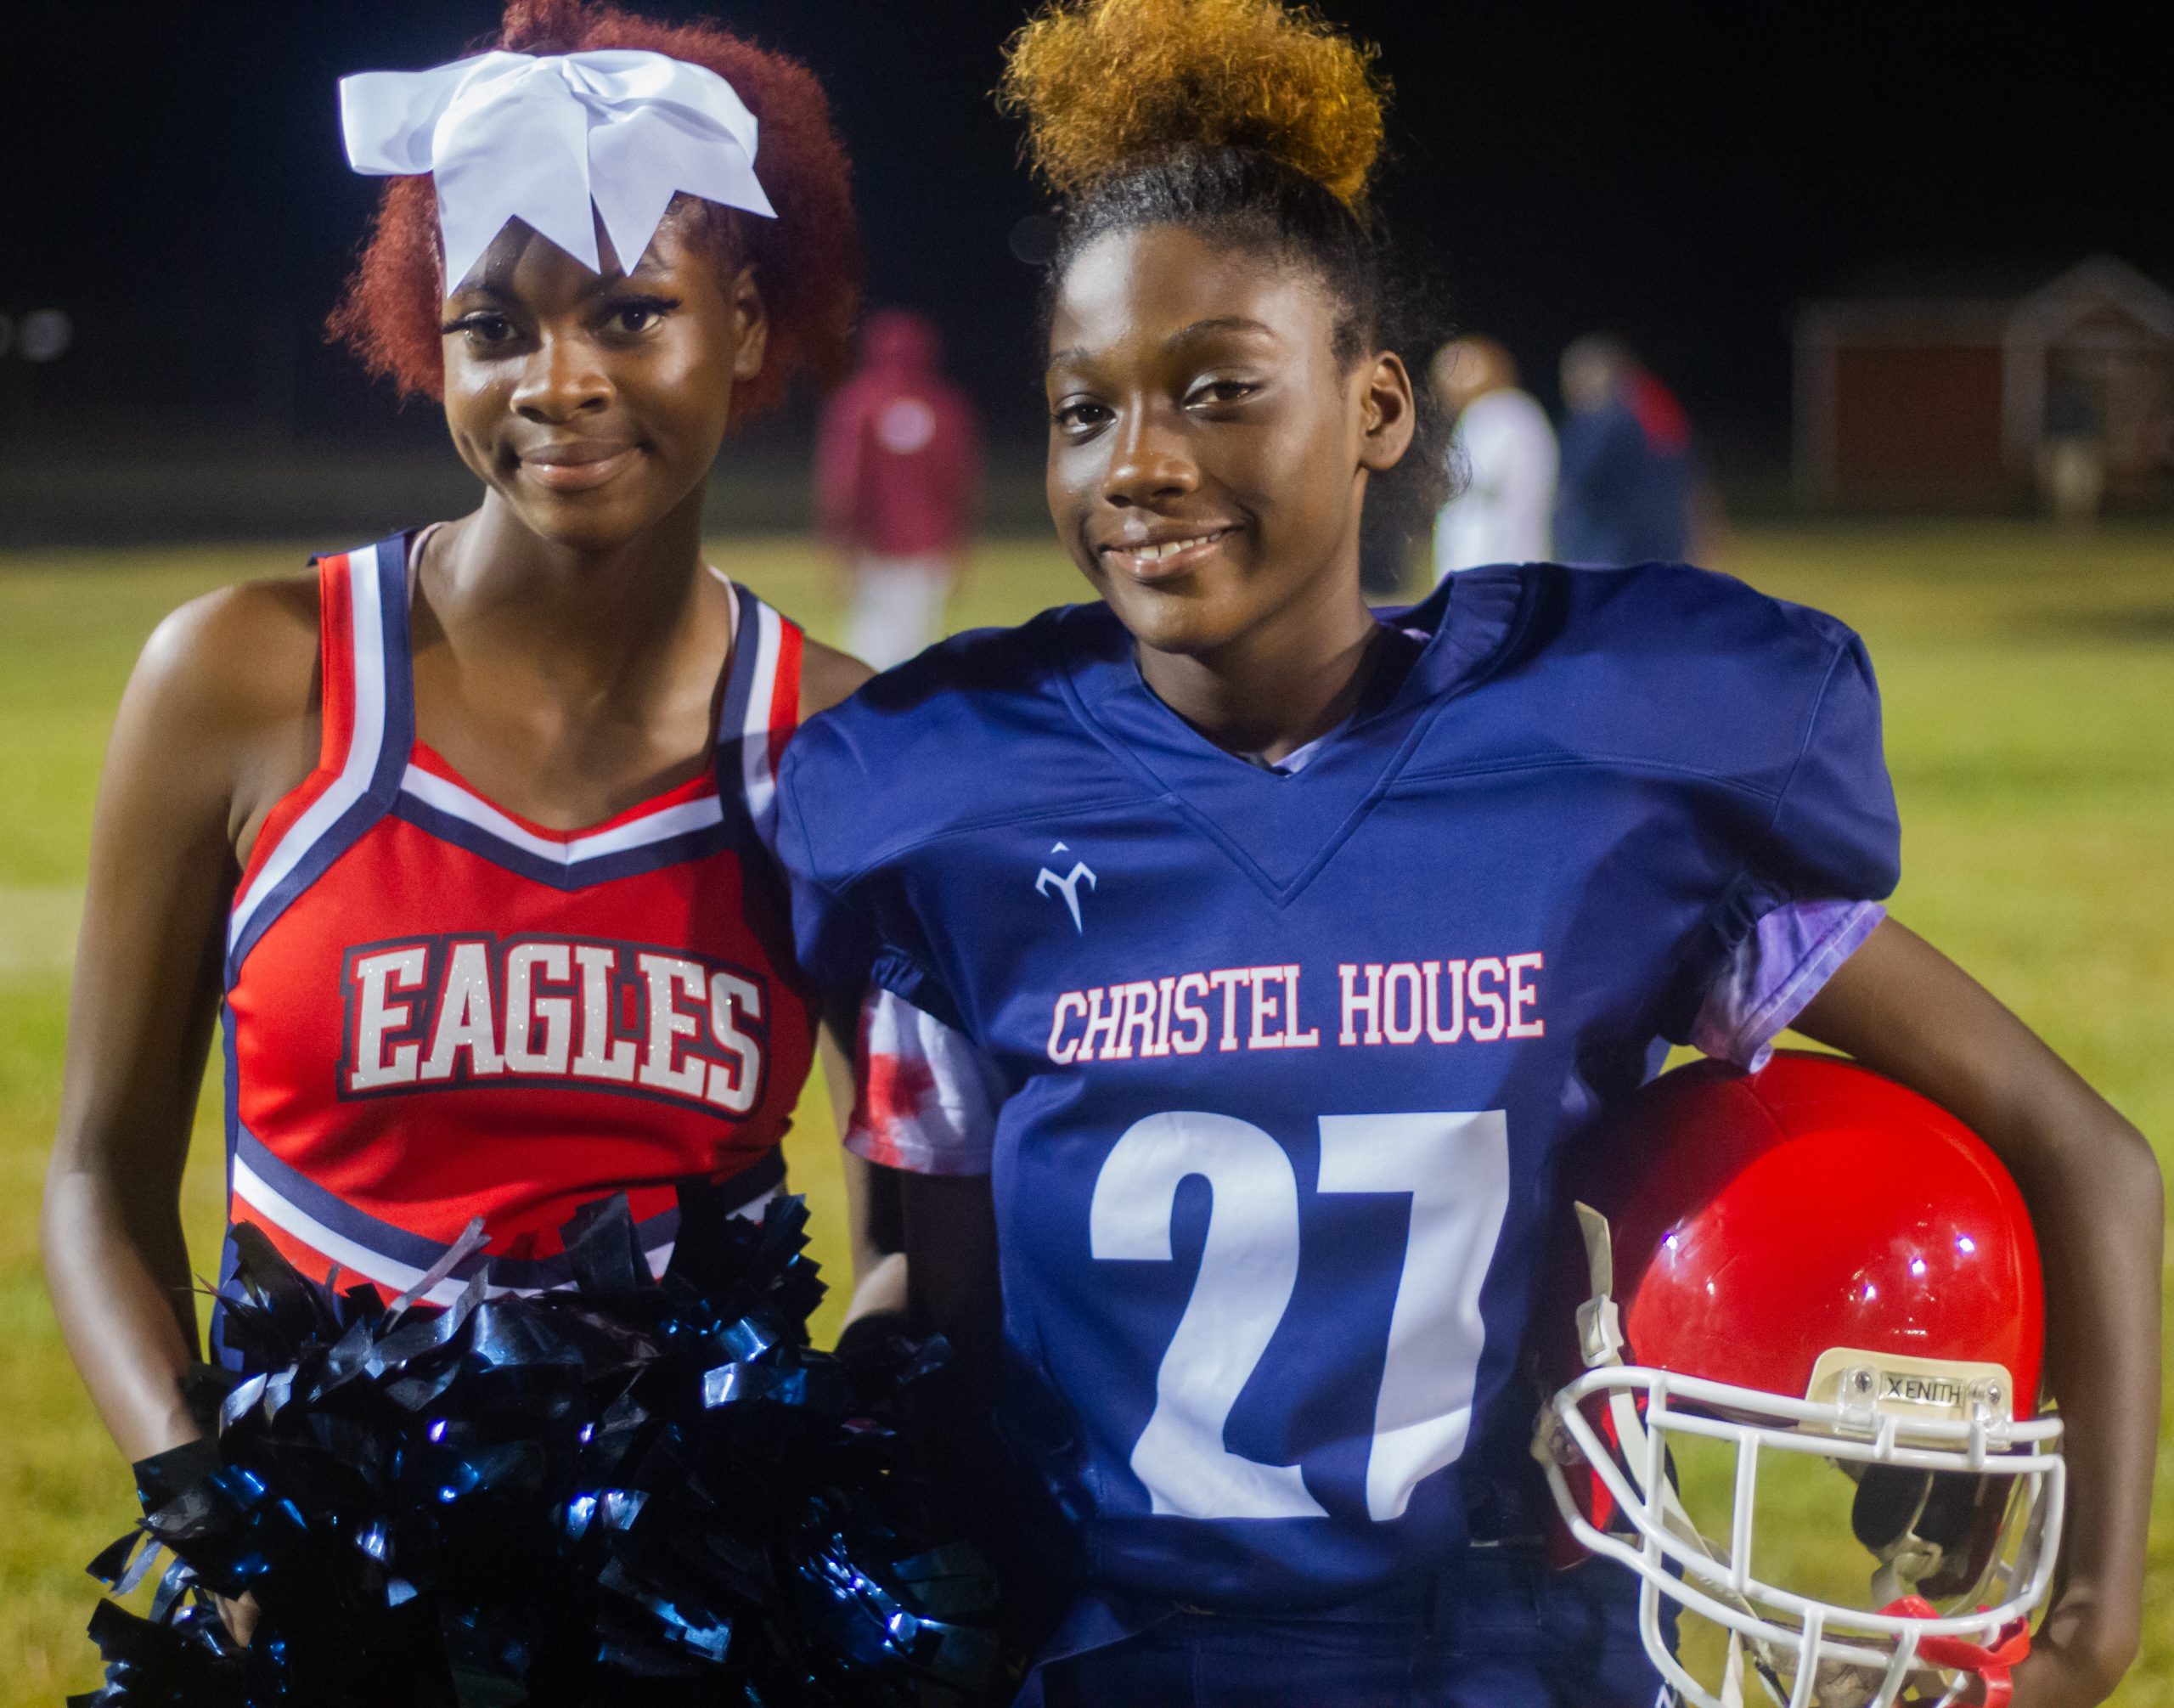 Two girls pose on a football field. One girl is dressed as a cheerleader and the other girl is in a football uniform.